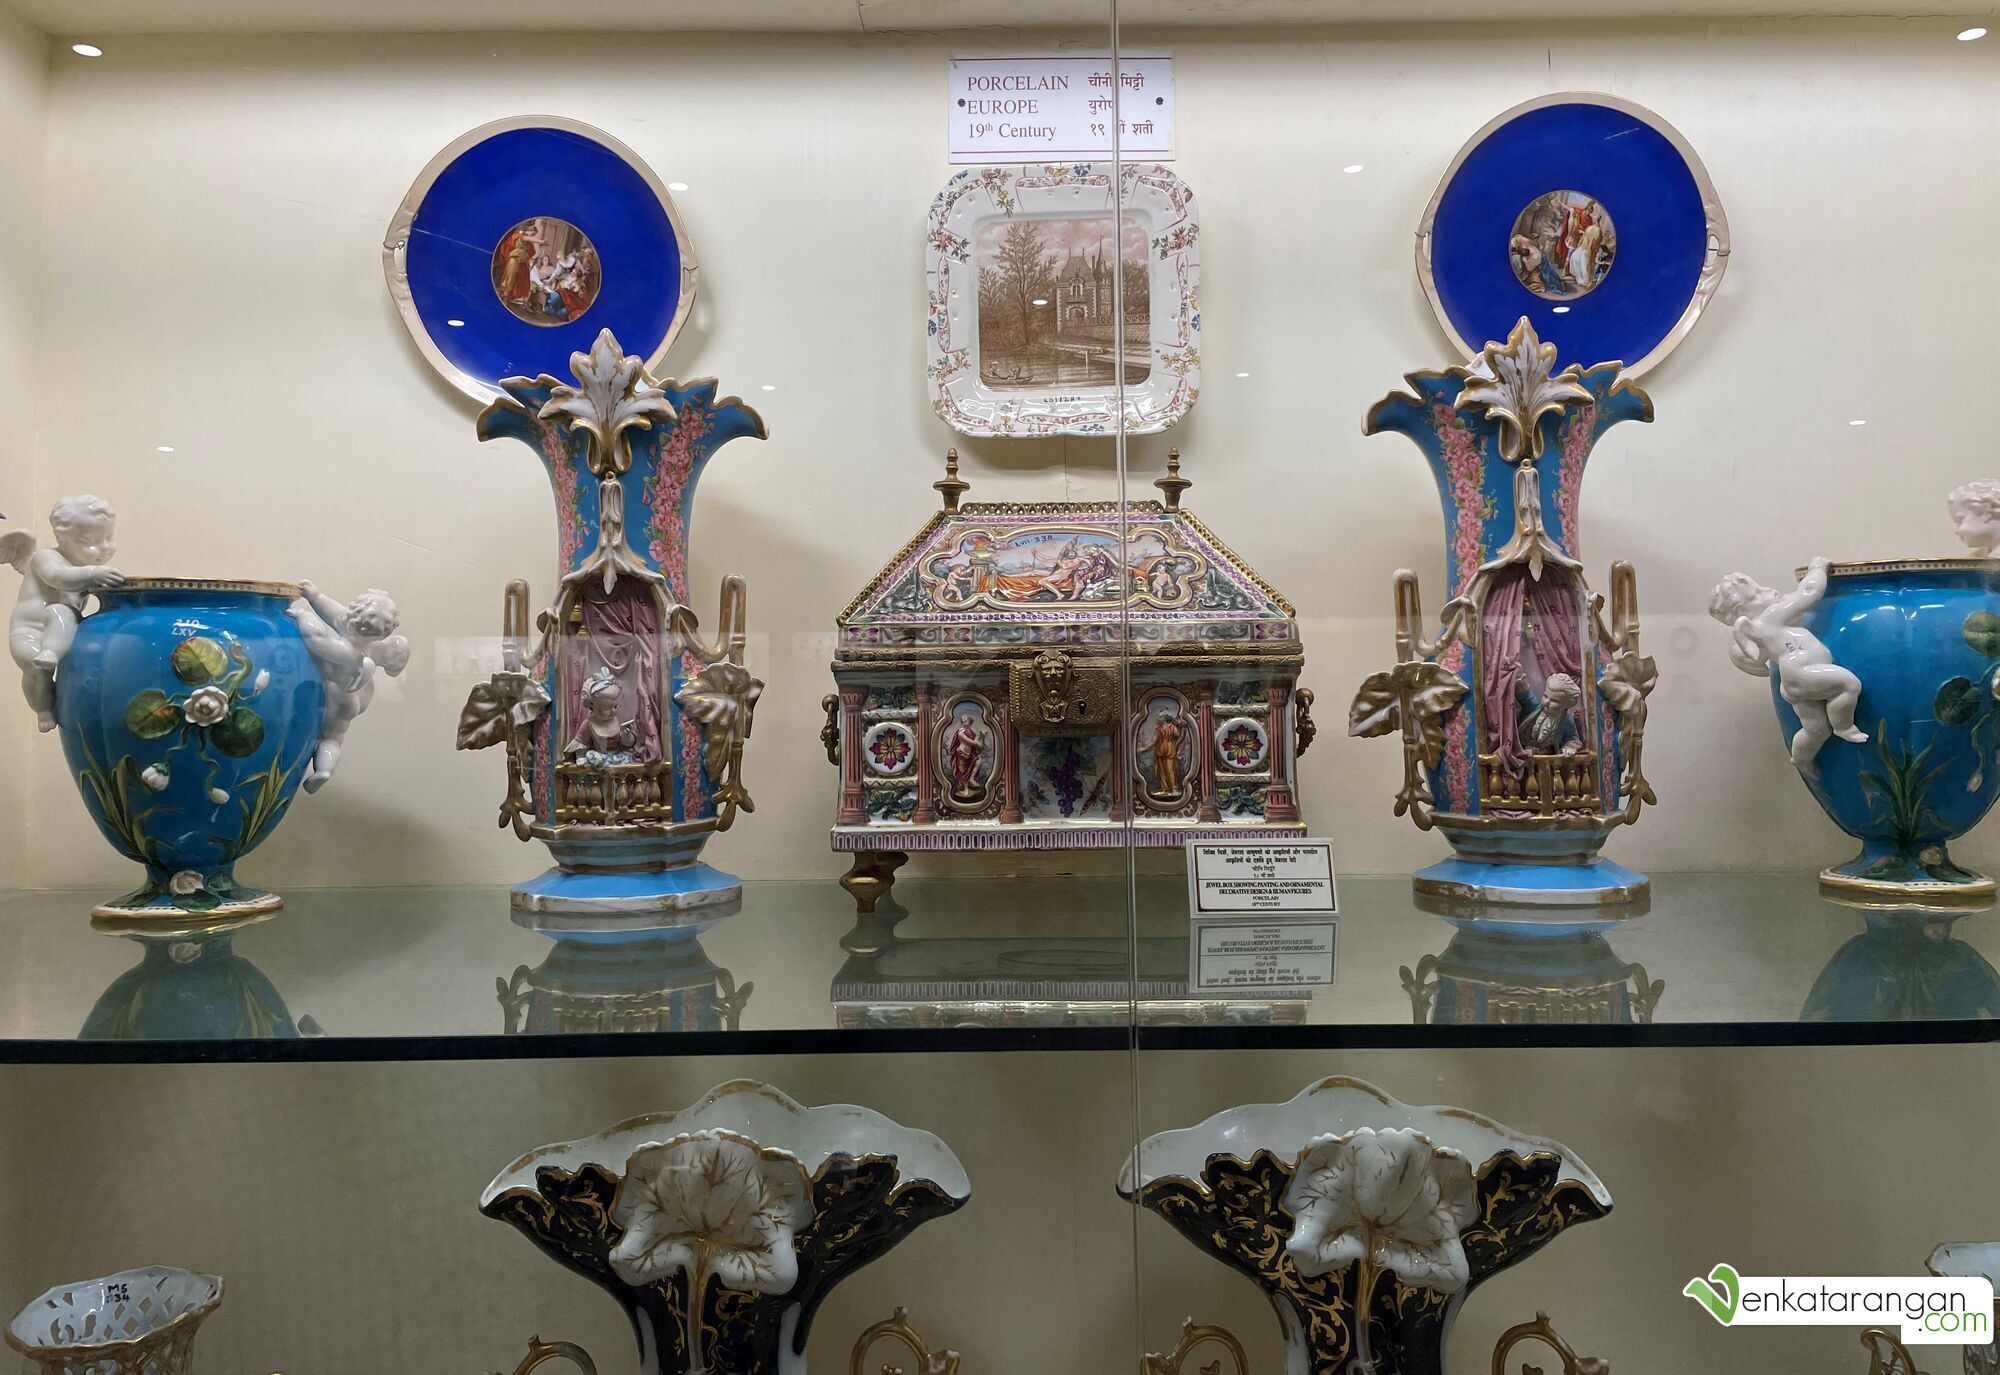 19th Century Porcelain from the Europe